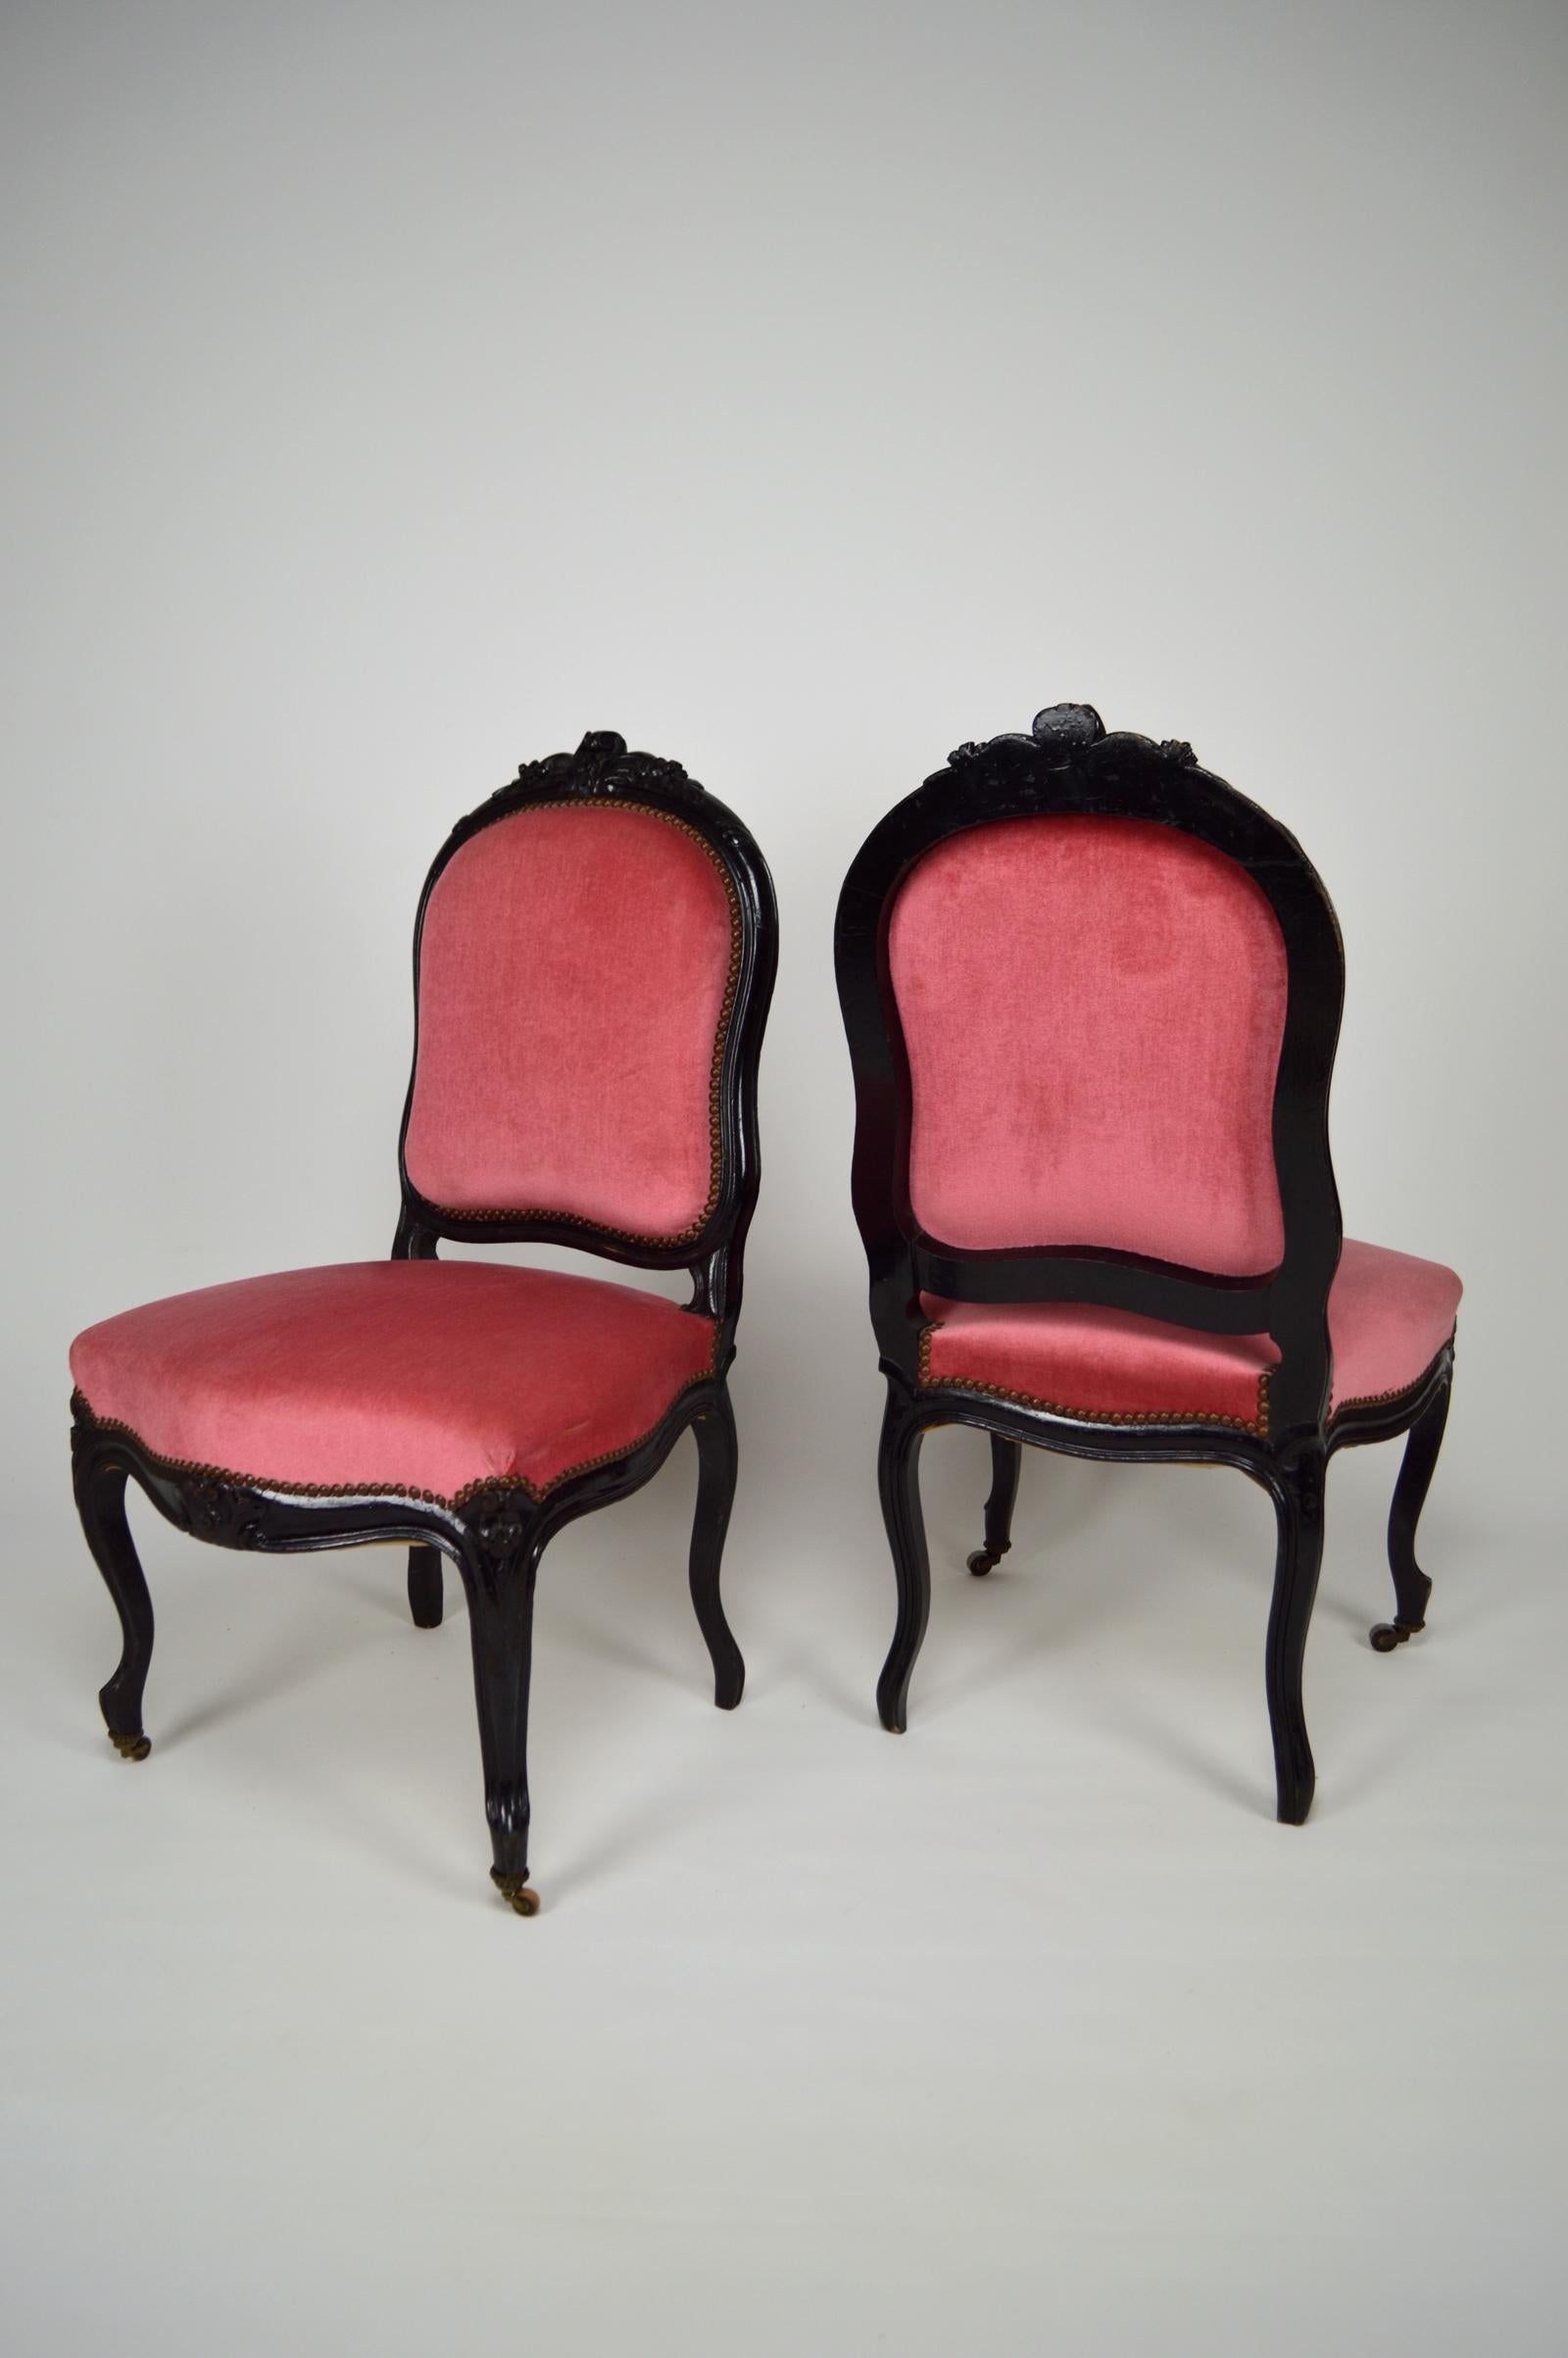 Pair of side/lounge chairs in ebonized and carved wood.
The seats and backs are covered in pink velvet fabric.
The chairs are mounted on wheels.

Napoleon III style, France, circa 1870.

In good condition.

Dimensions:
height 97 cm,
width 52